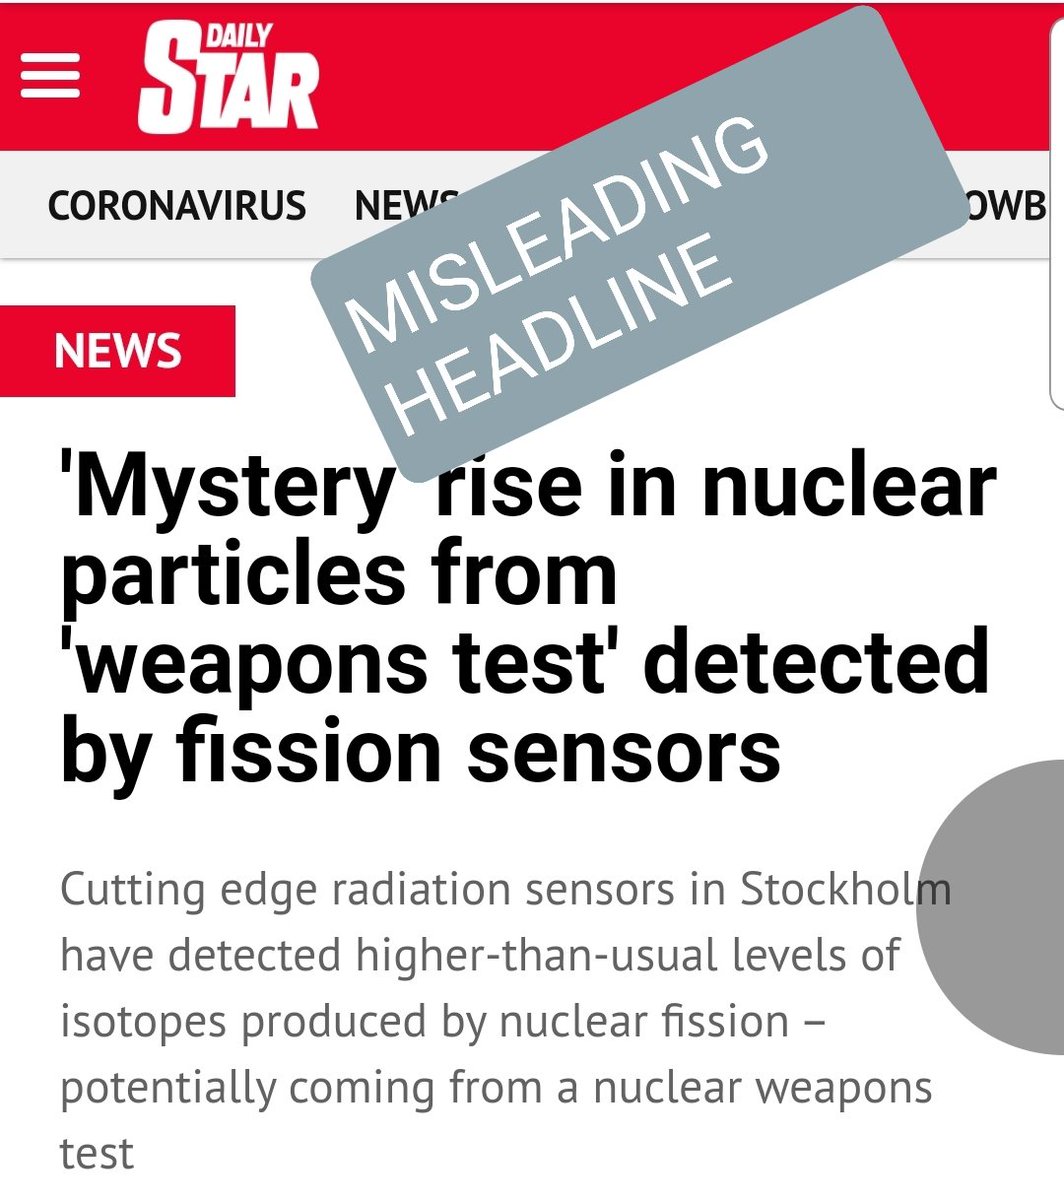 At this time there do NOT appear to be other indicators of a nuclear explosive test, such as hydroacoustic, seismic, and/or infrasound data. Nor have I seen reports of a wider number of radionuclides than the original 3 reported. This Daily Star headline is misleading